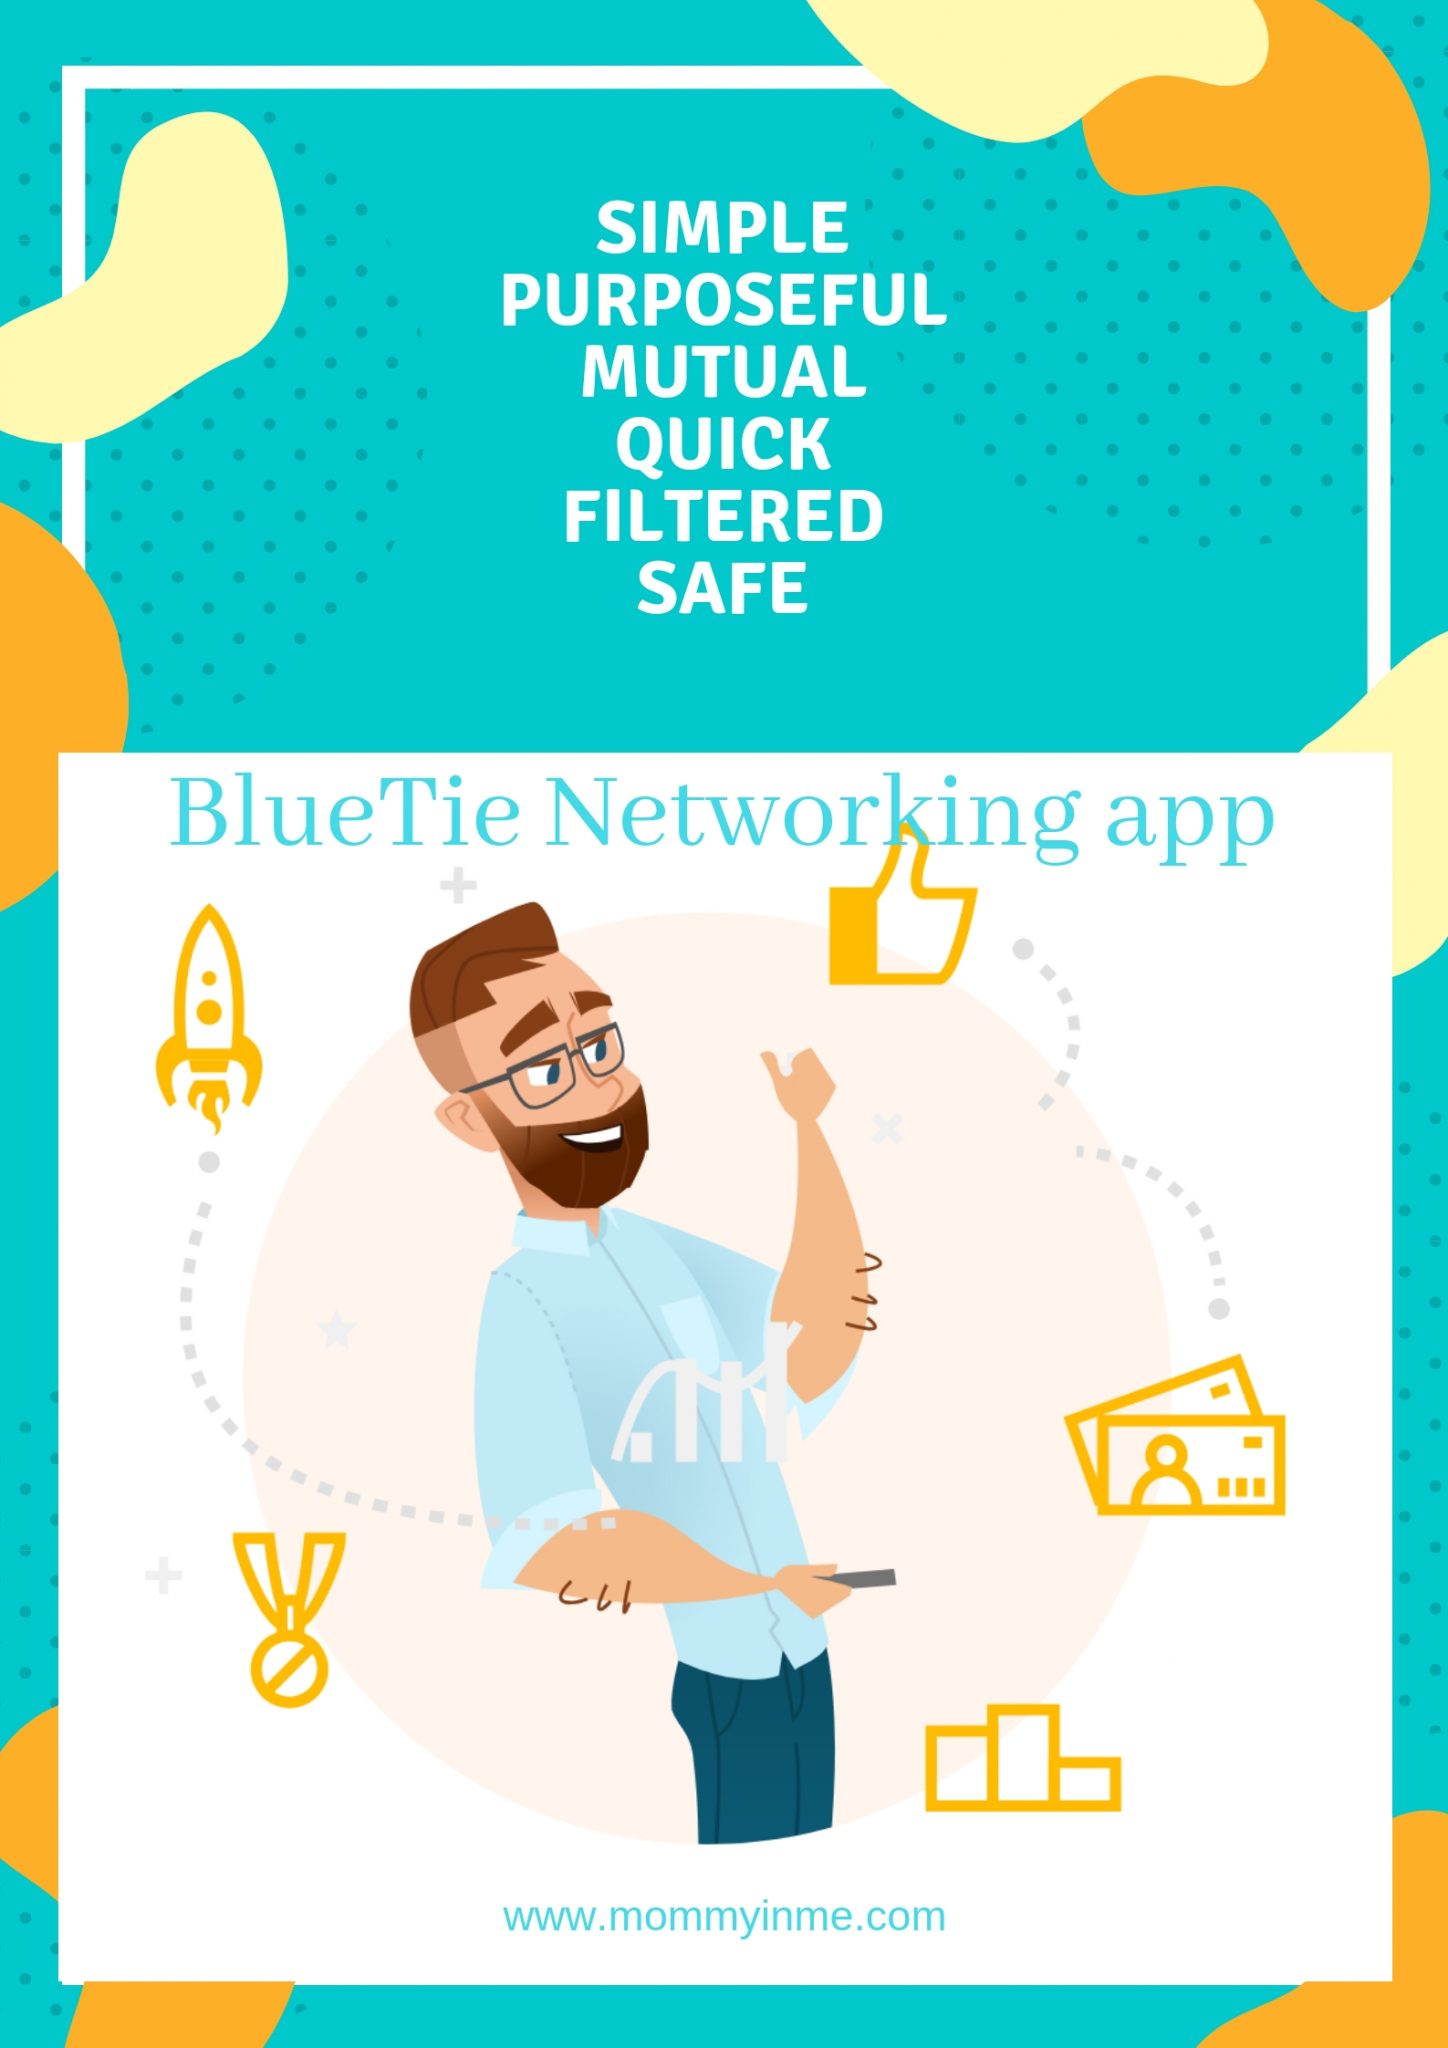 Are you a professional looking for some serious networking, be it related to mentorship or seeking funds or more? Then read the post & download BlueTie app. #bluetie #professionalnetworking #businessnetworking #networking #networkingapp #KumalGarud #funding #investor #mentorship #Linkedin